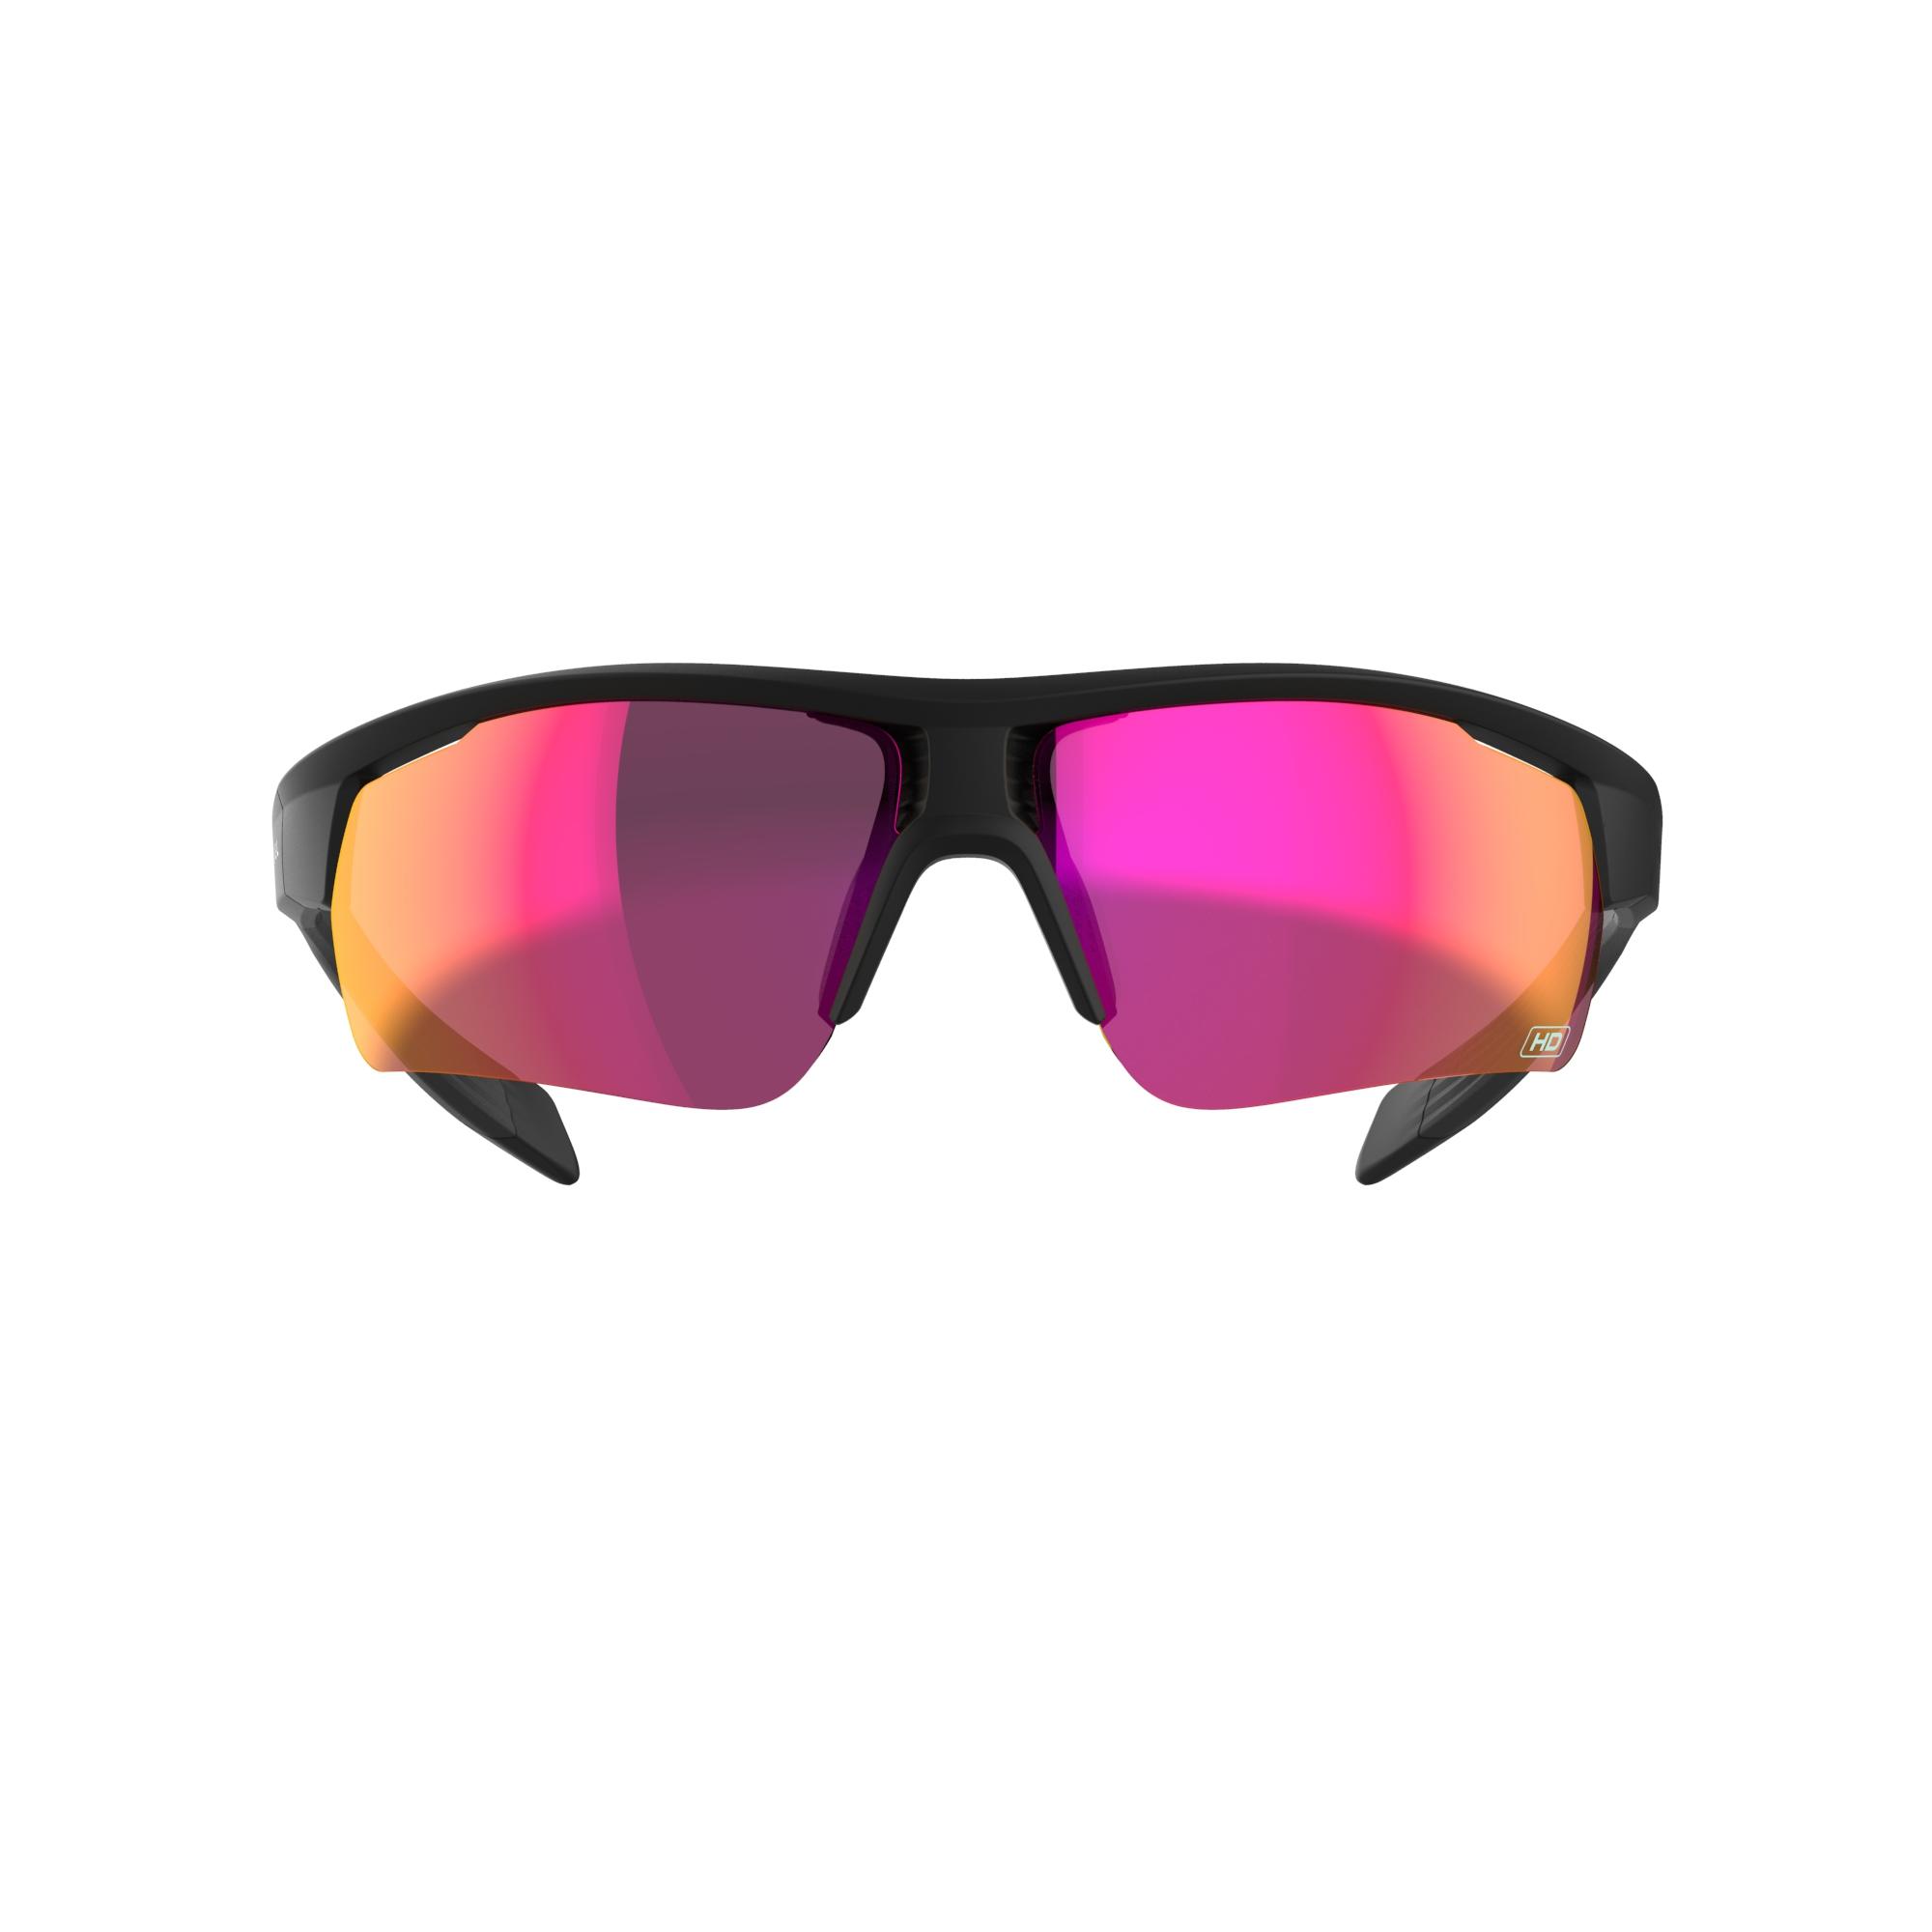 Has someone with contact lenses tried the Van Rysel Roadr 920 sunglasses? :  r/CyclingFashion